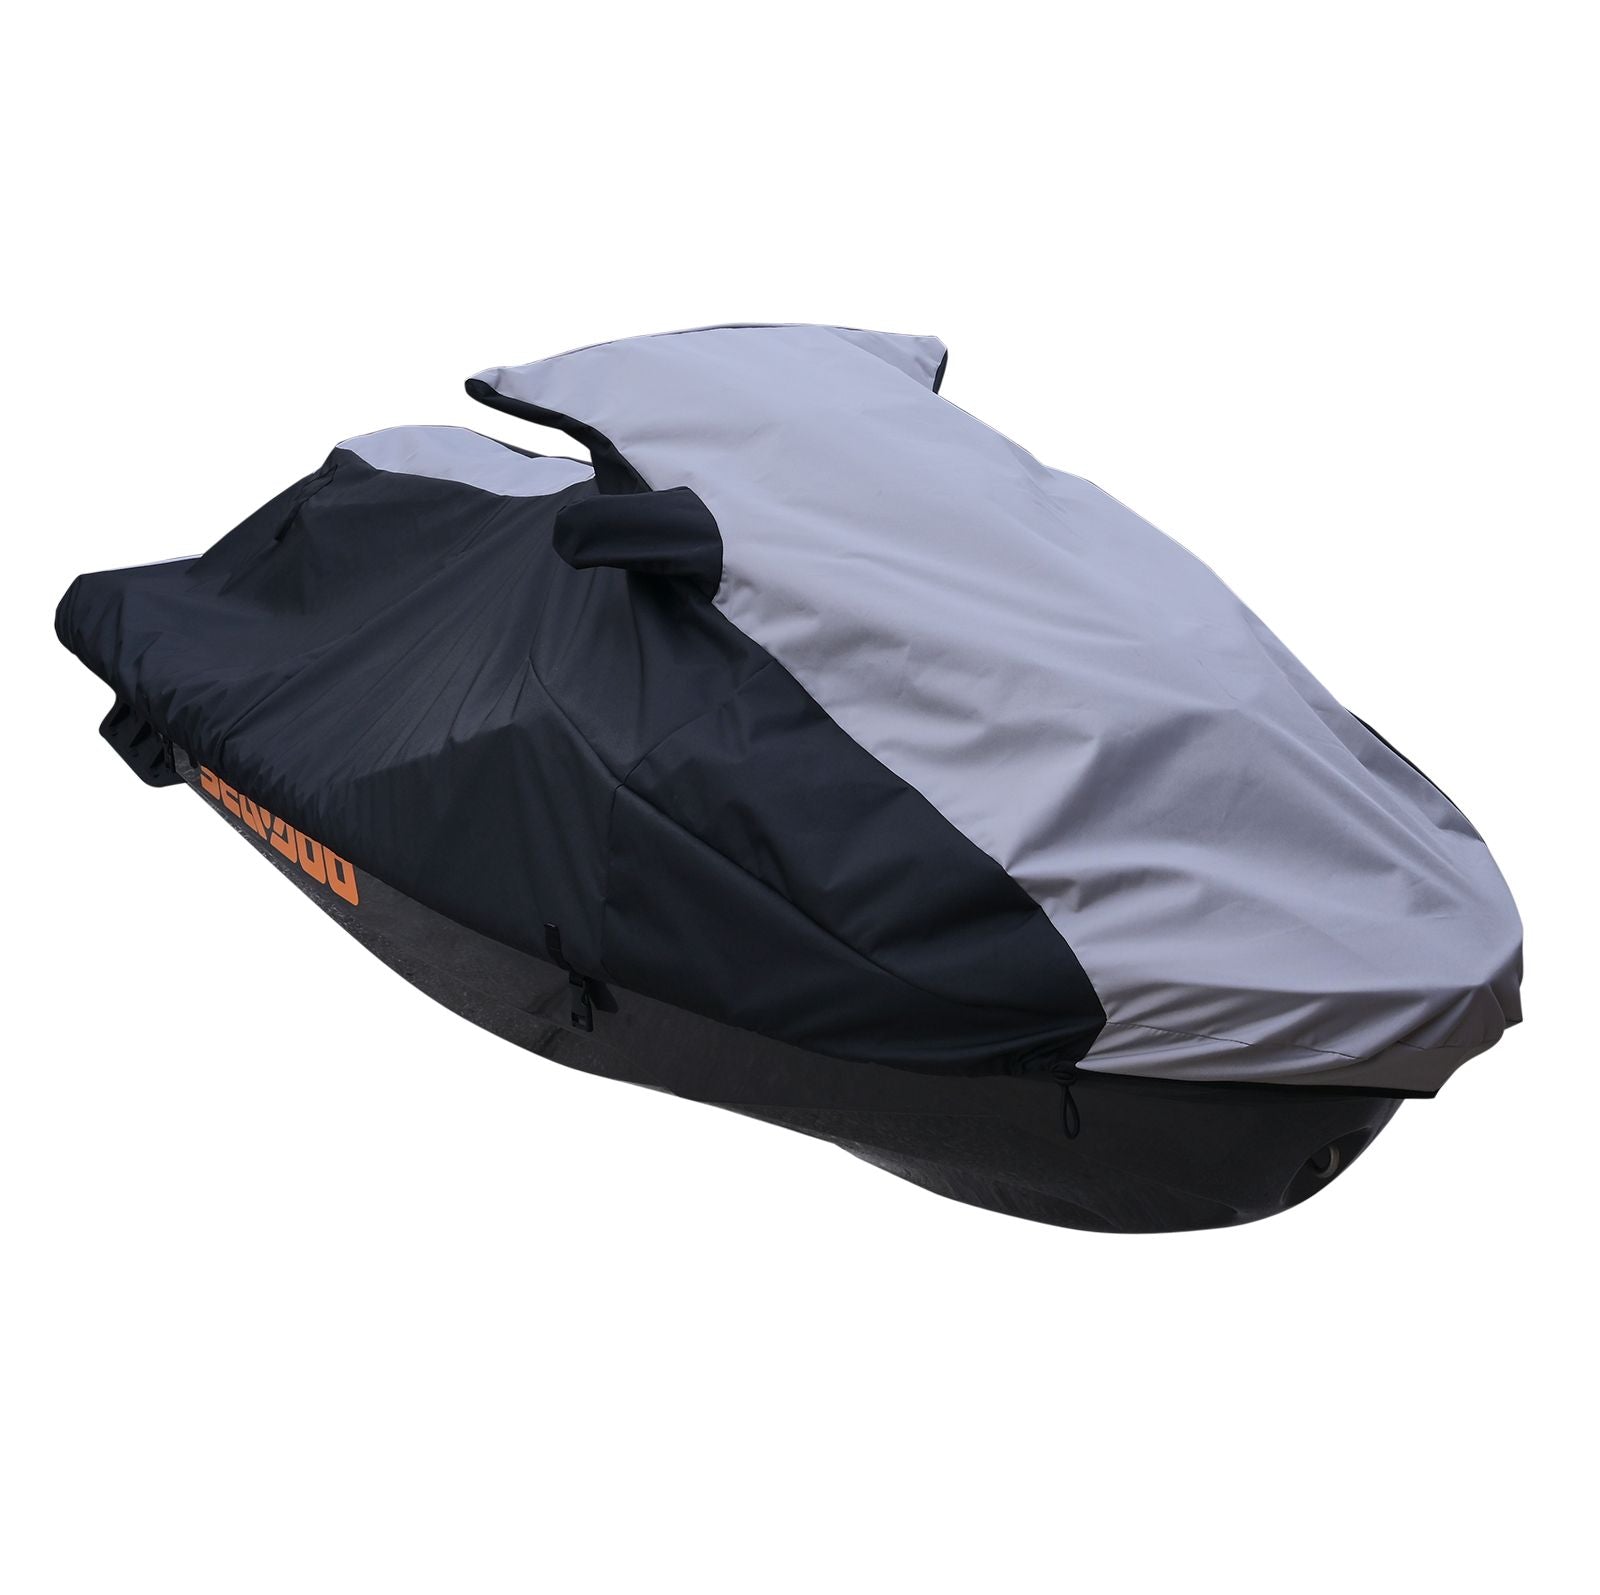 Trailerable  Storage cover with vents for Yamaha 2012-2022 FX HO, SHO , SVHO/Limited, Cruiser